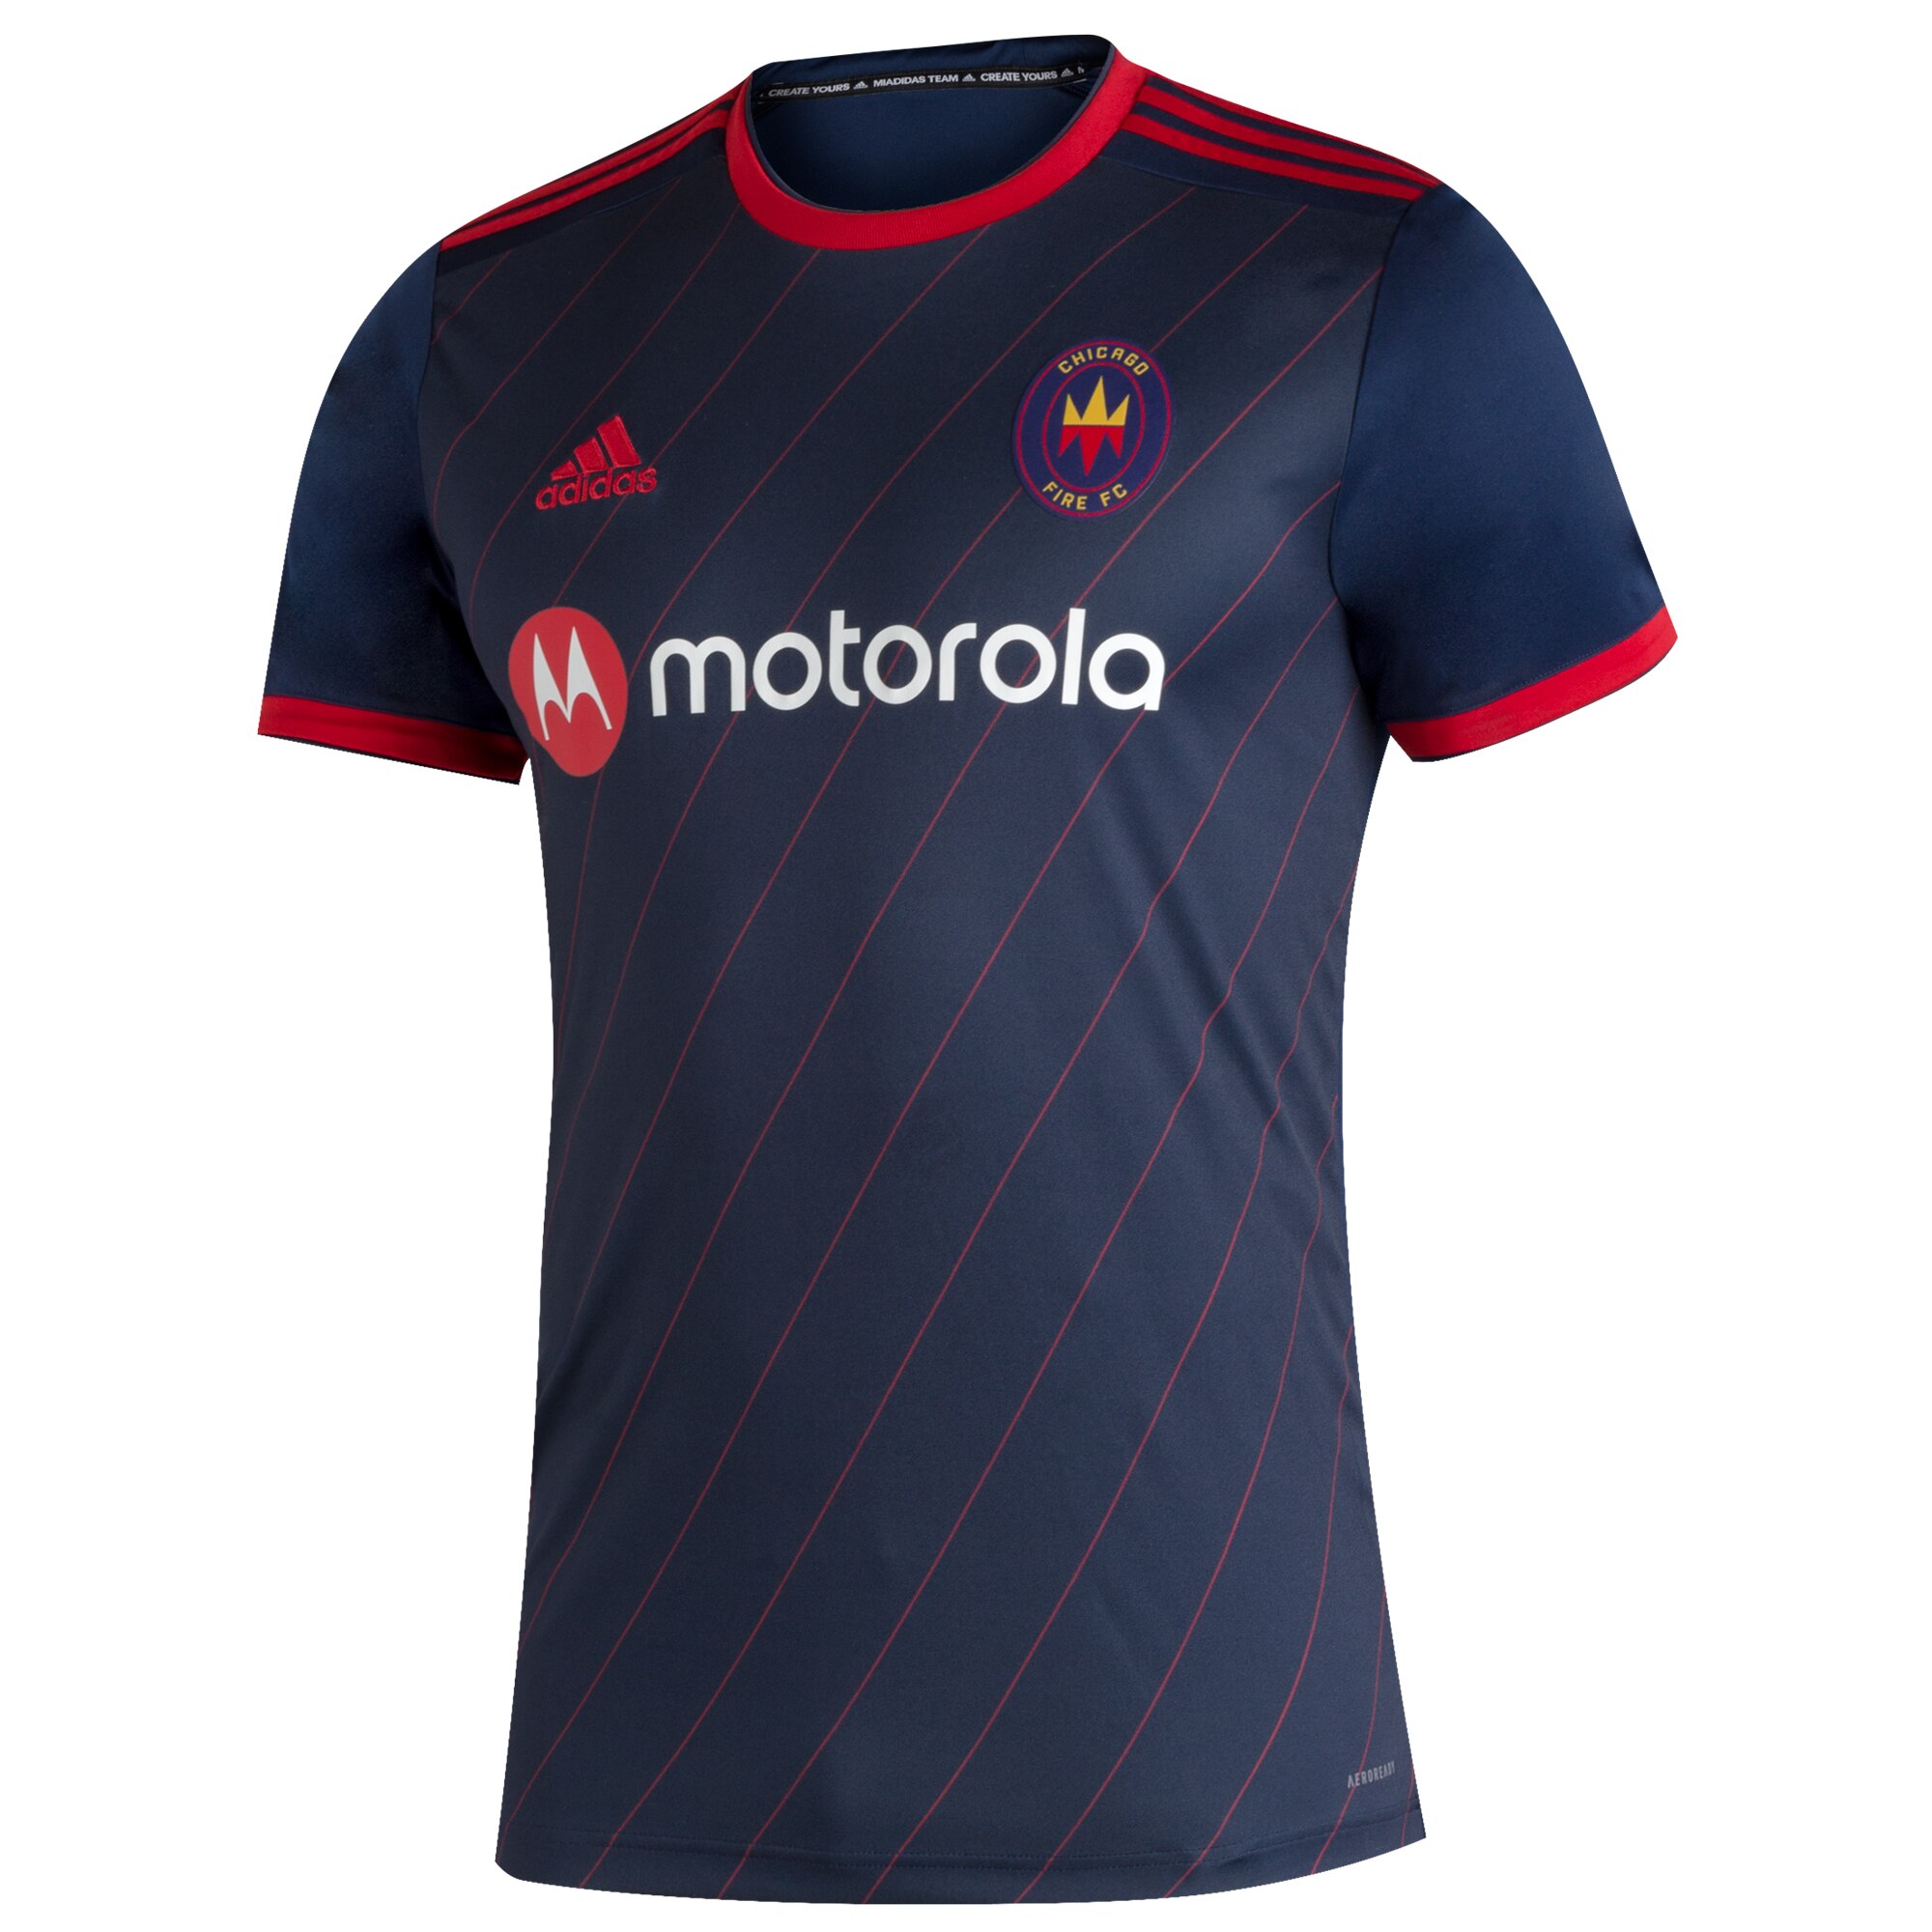 mls chicago fire jersey